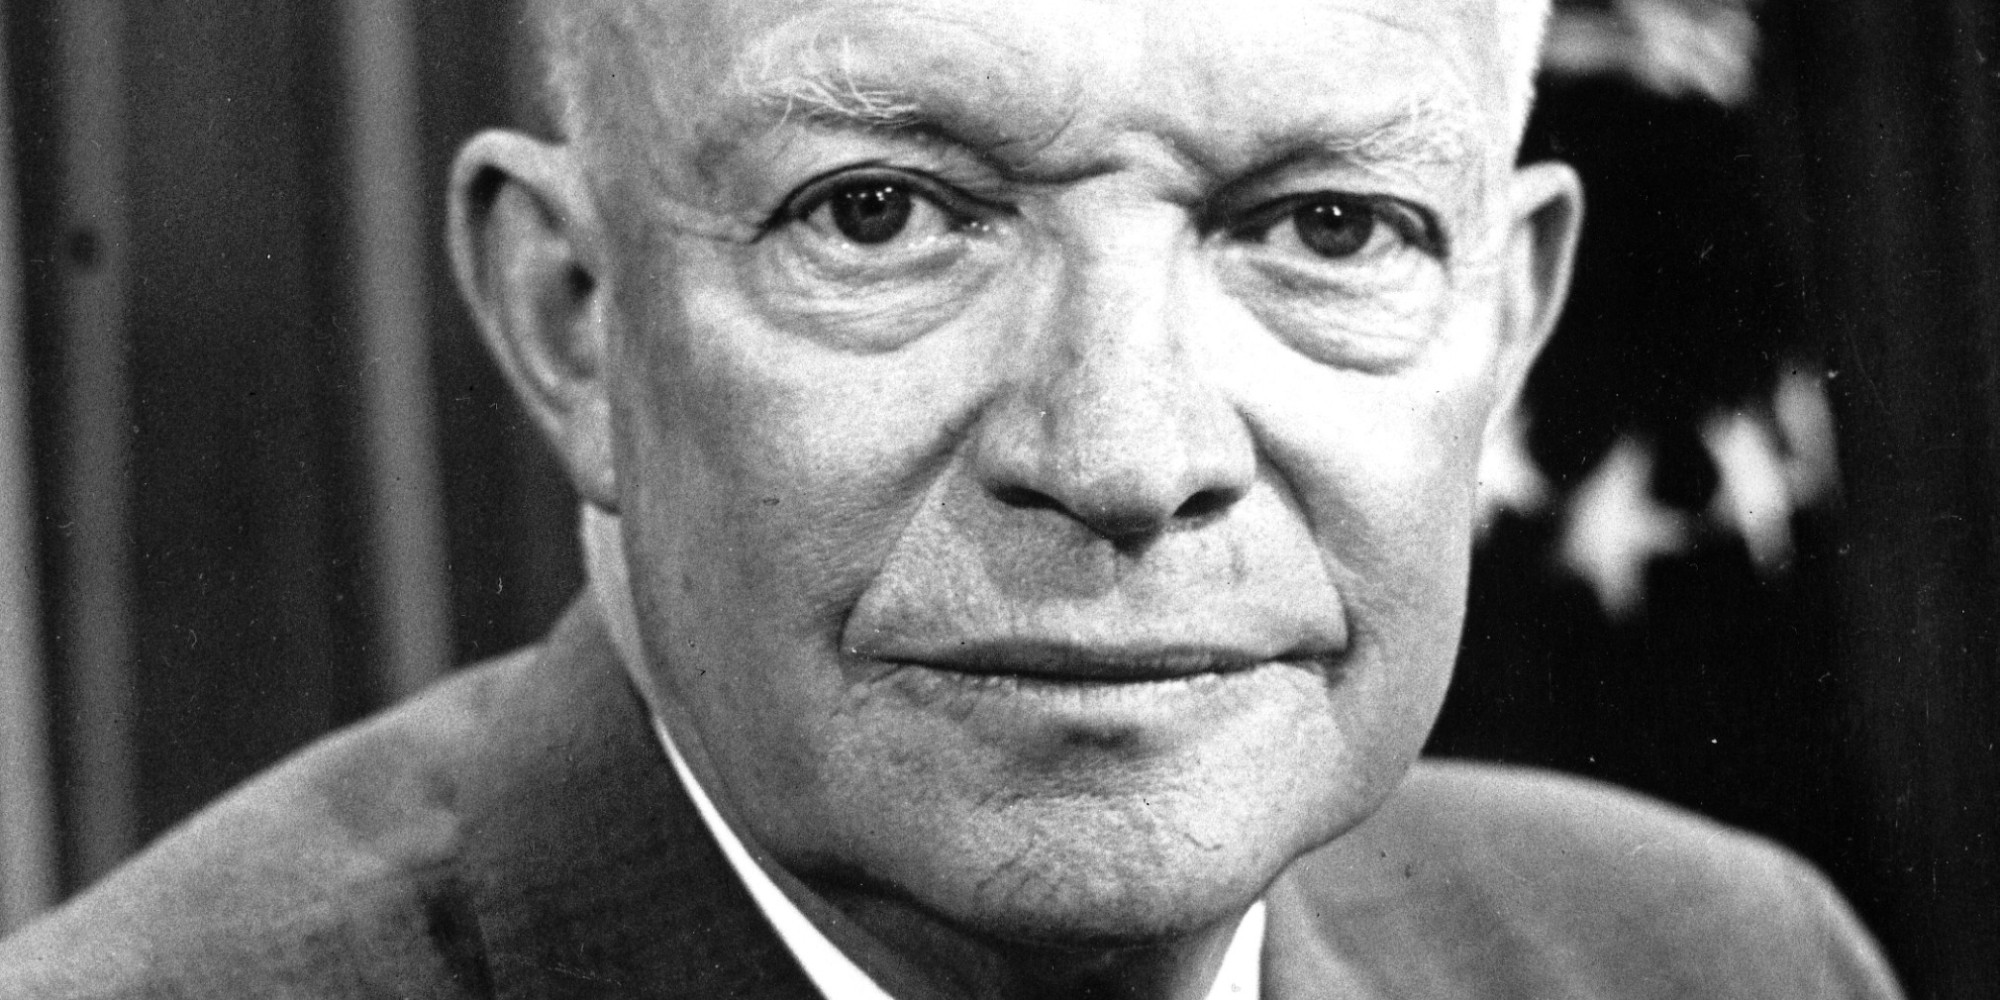 Dwight Eisenhower and Alien Contact in the 1950s